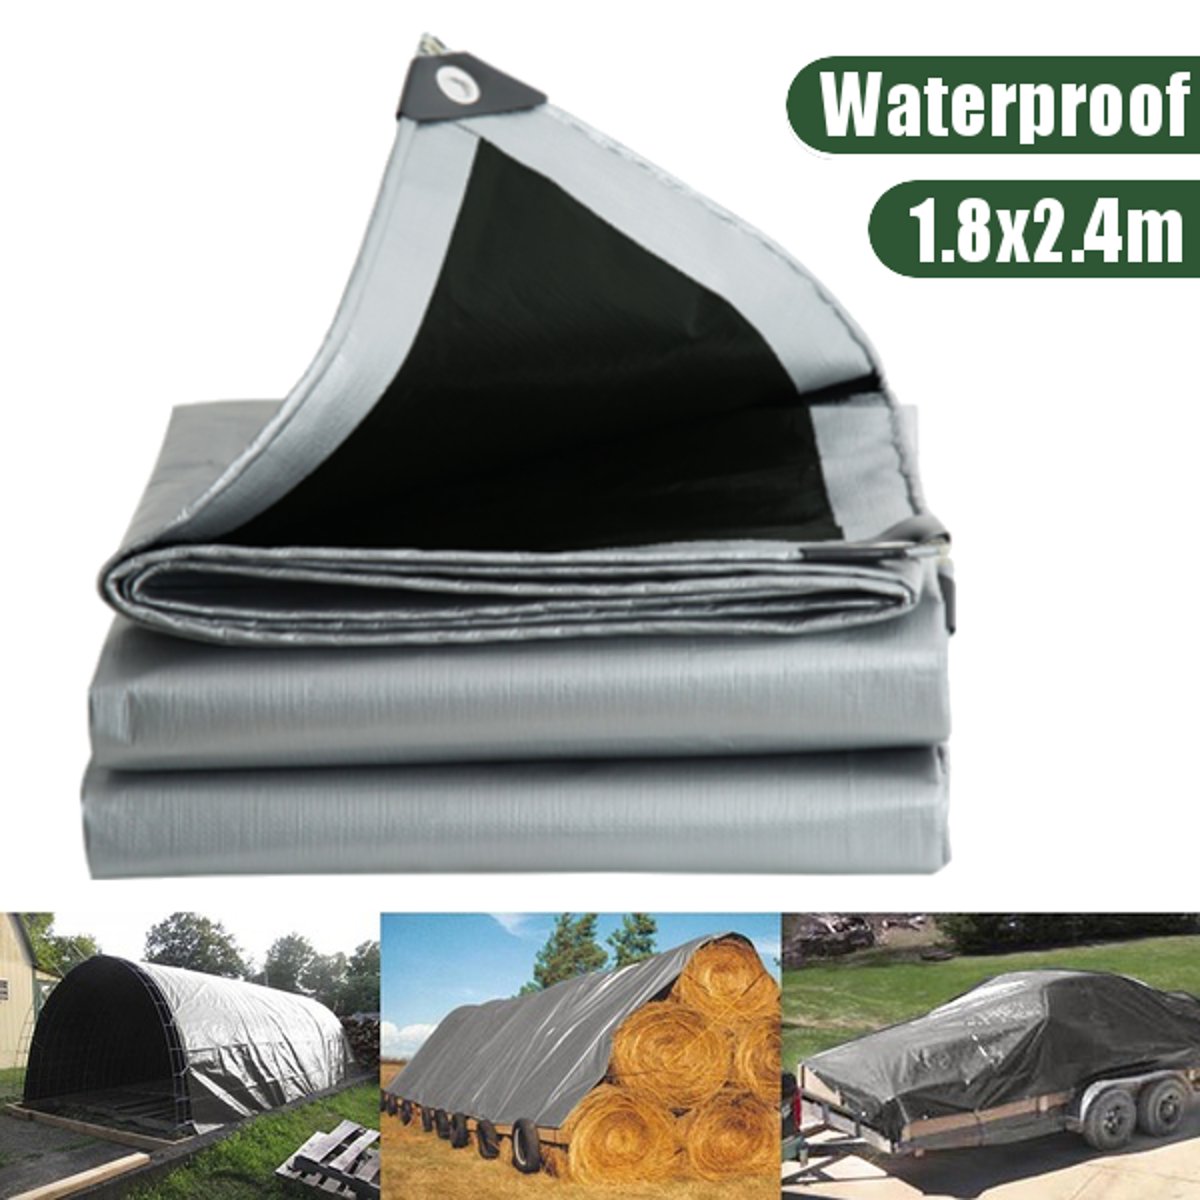 18x24m-Waterproof-Camping-Tarp-Ground-Sheet-Outdoor-Garden-Cover-with-Eyelets-1626783-1